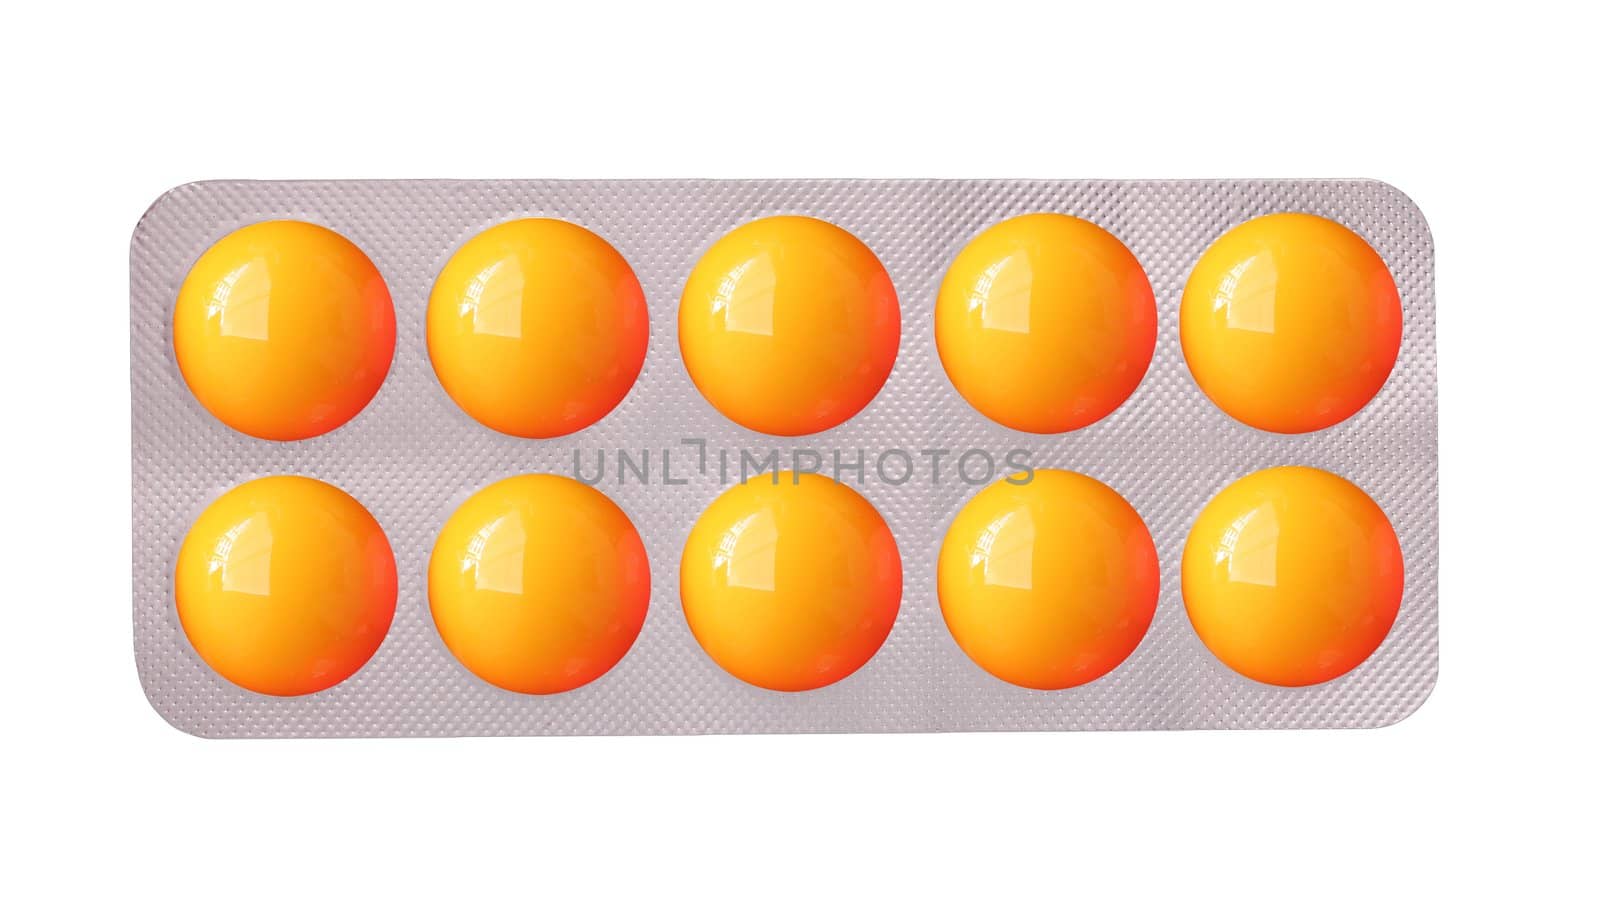 Colorful medicinal tablet strip isolated on white 